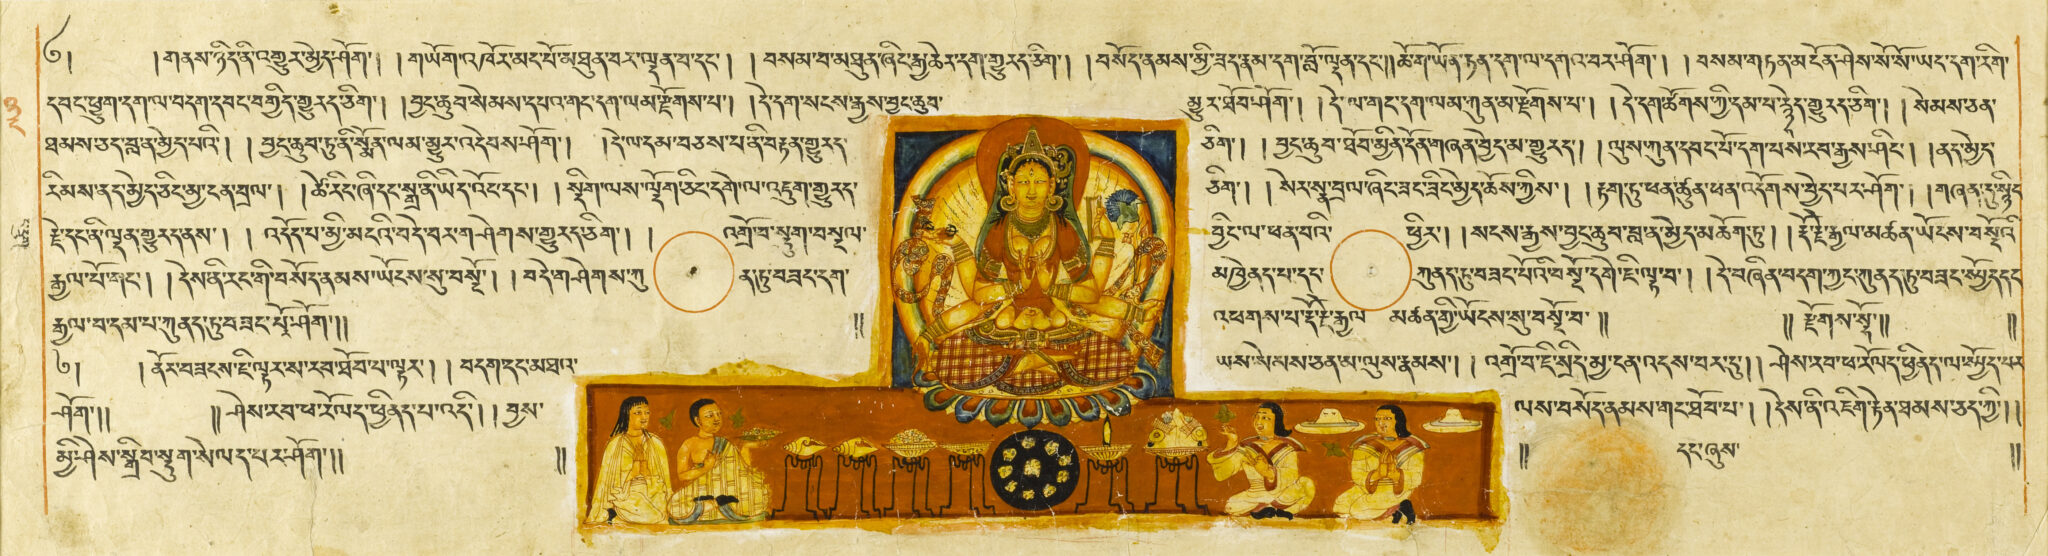 Rectangular page featuring lines of Tibetan script and illumination depicting deity seated above offerings and kneeling figures